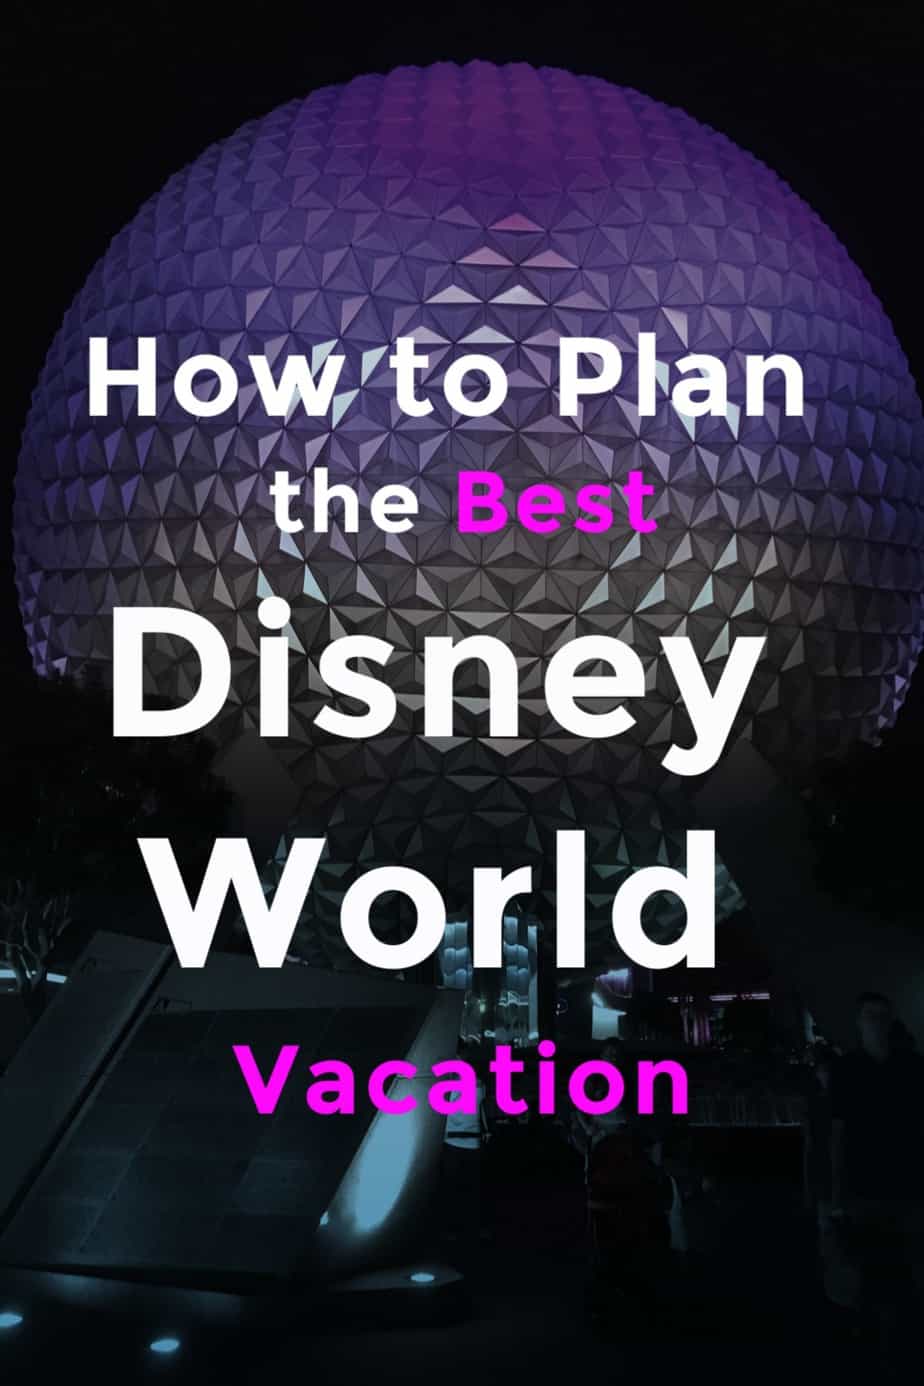 How to plan the best Disney world vacation